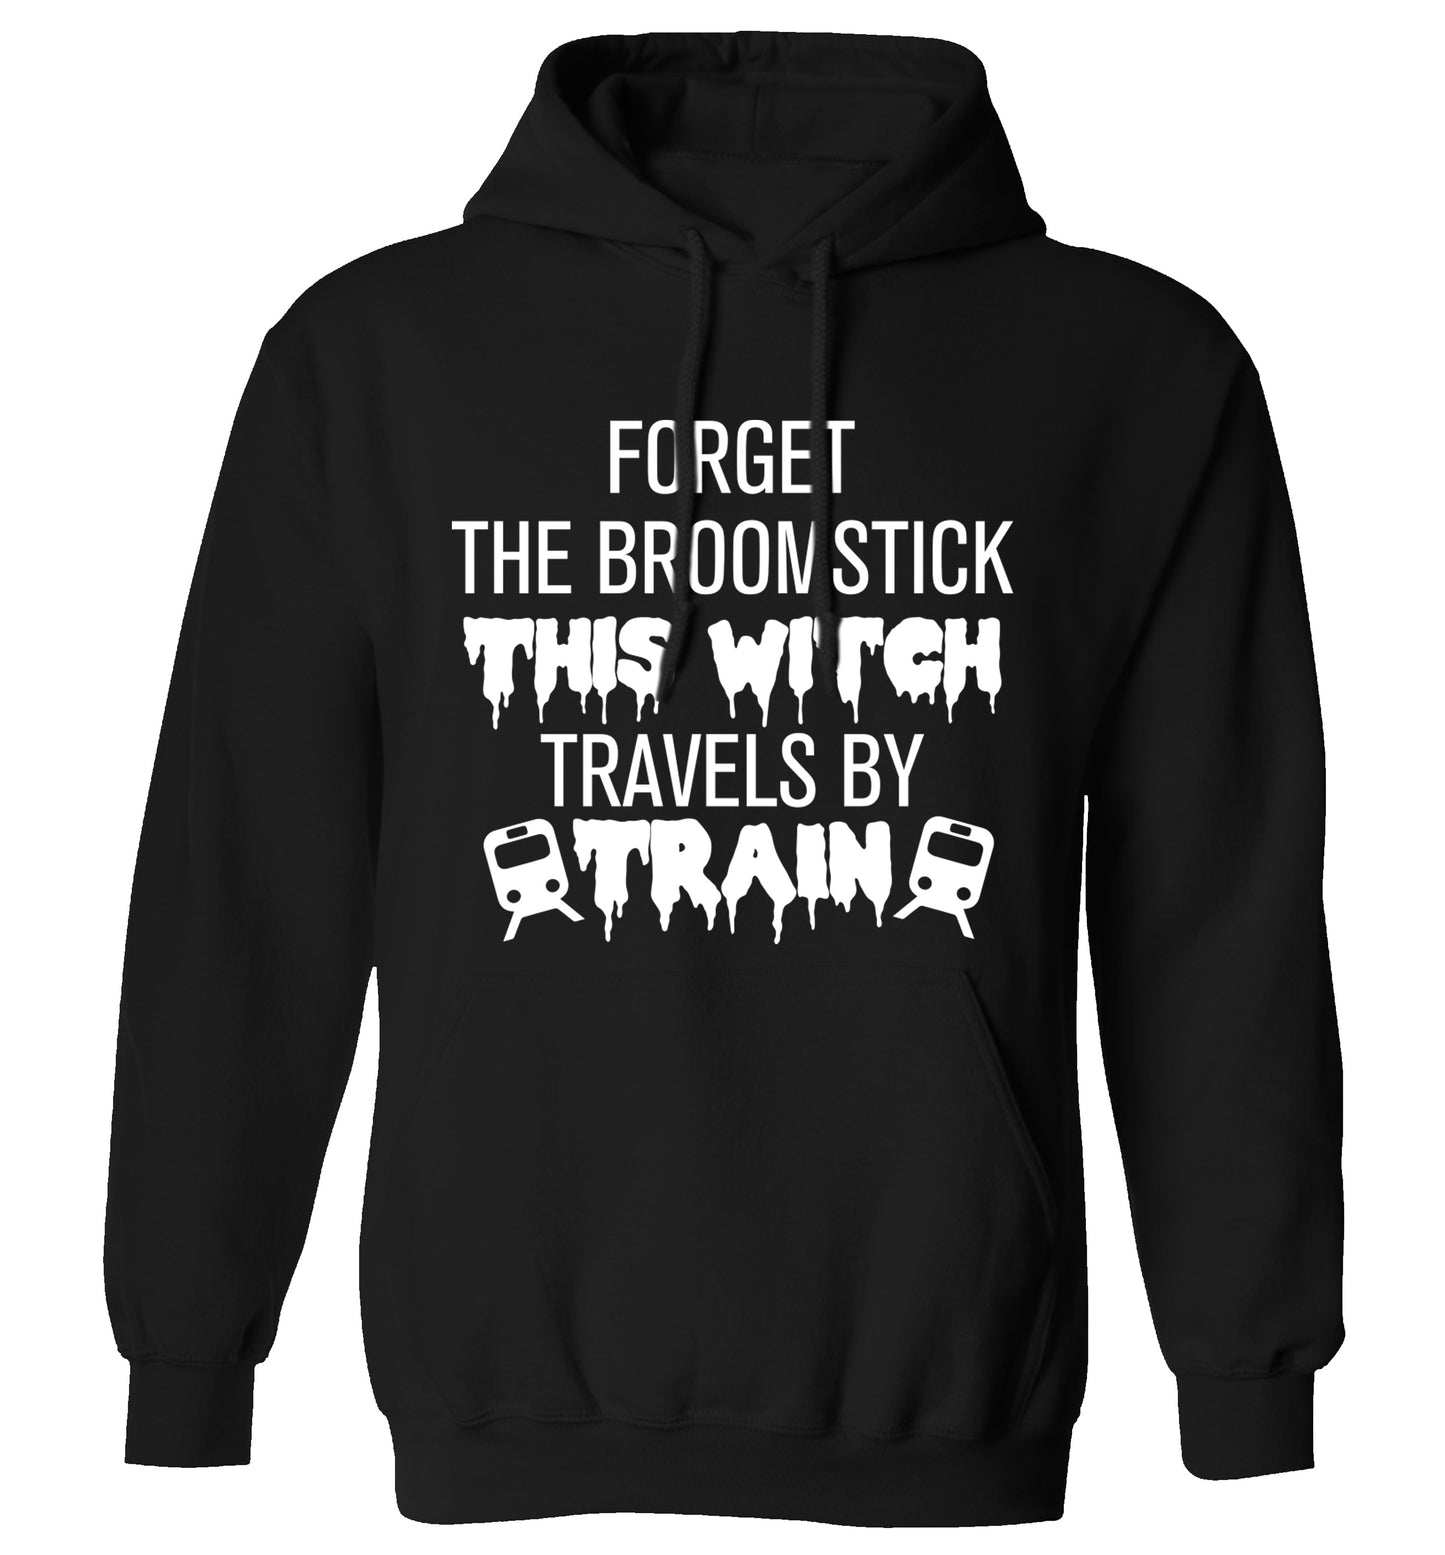 Forget the broomstick this witch travels by train adults unisexblack hoodie 2XL